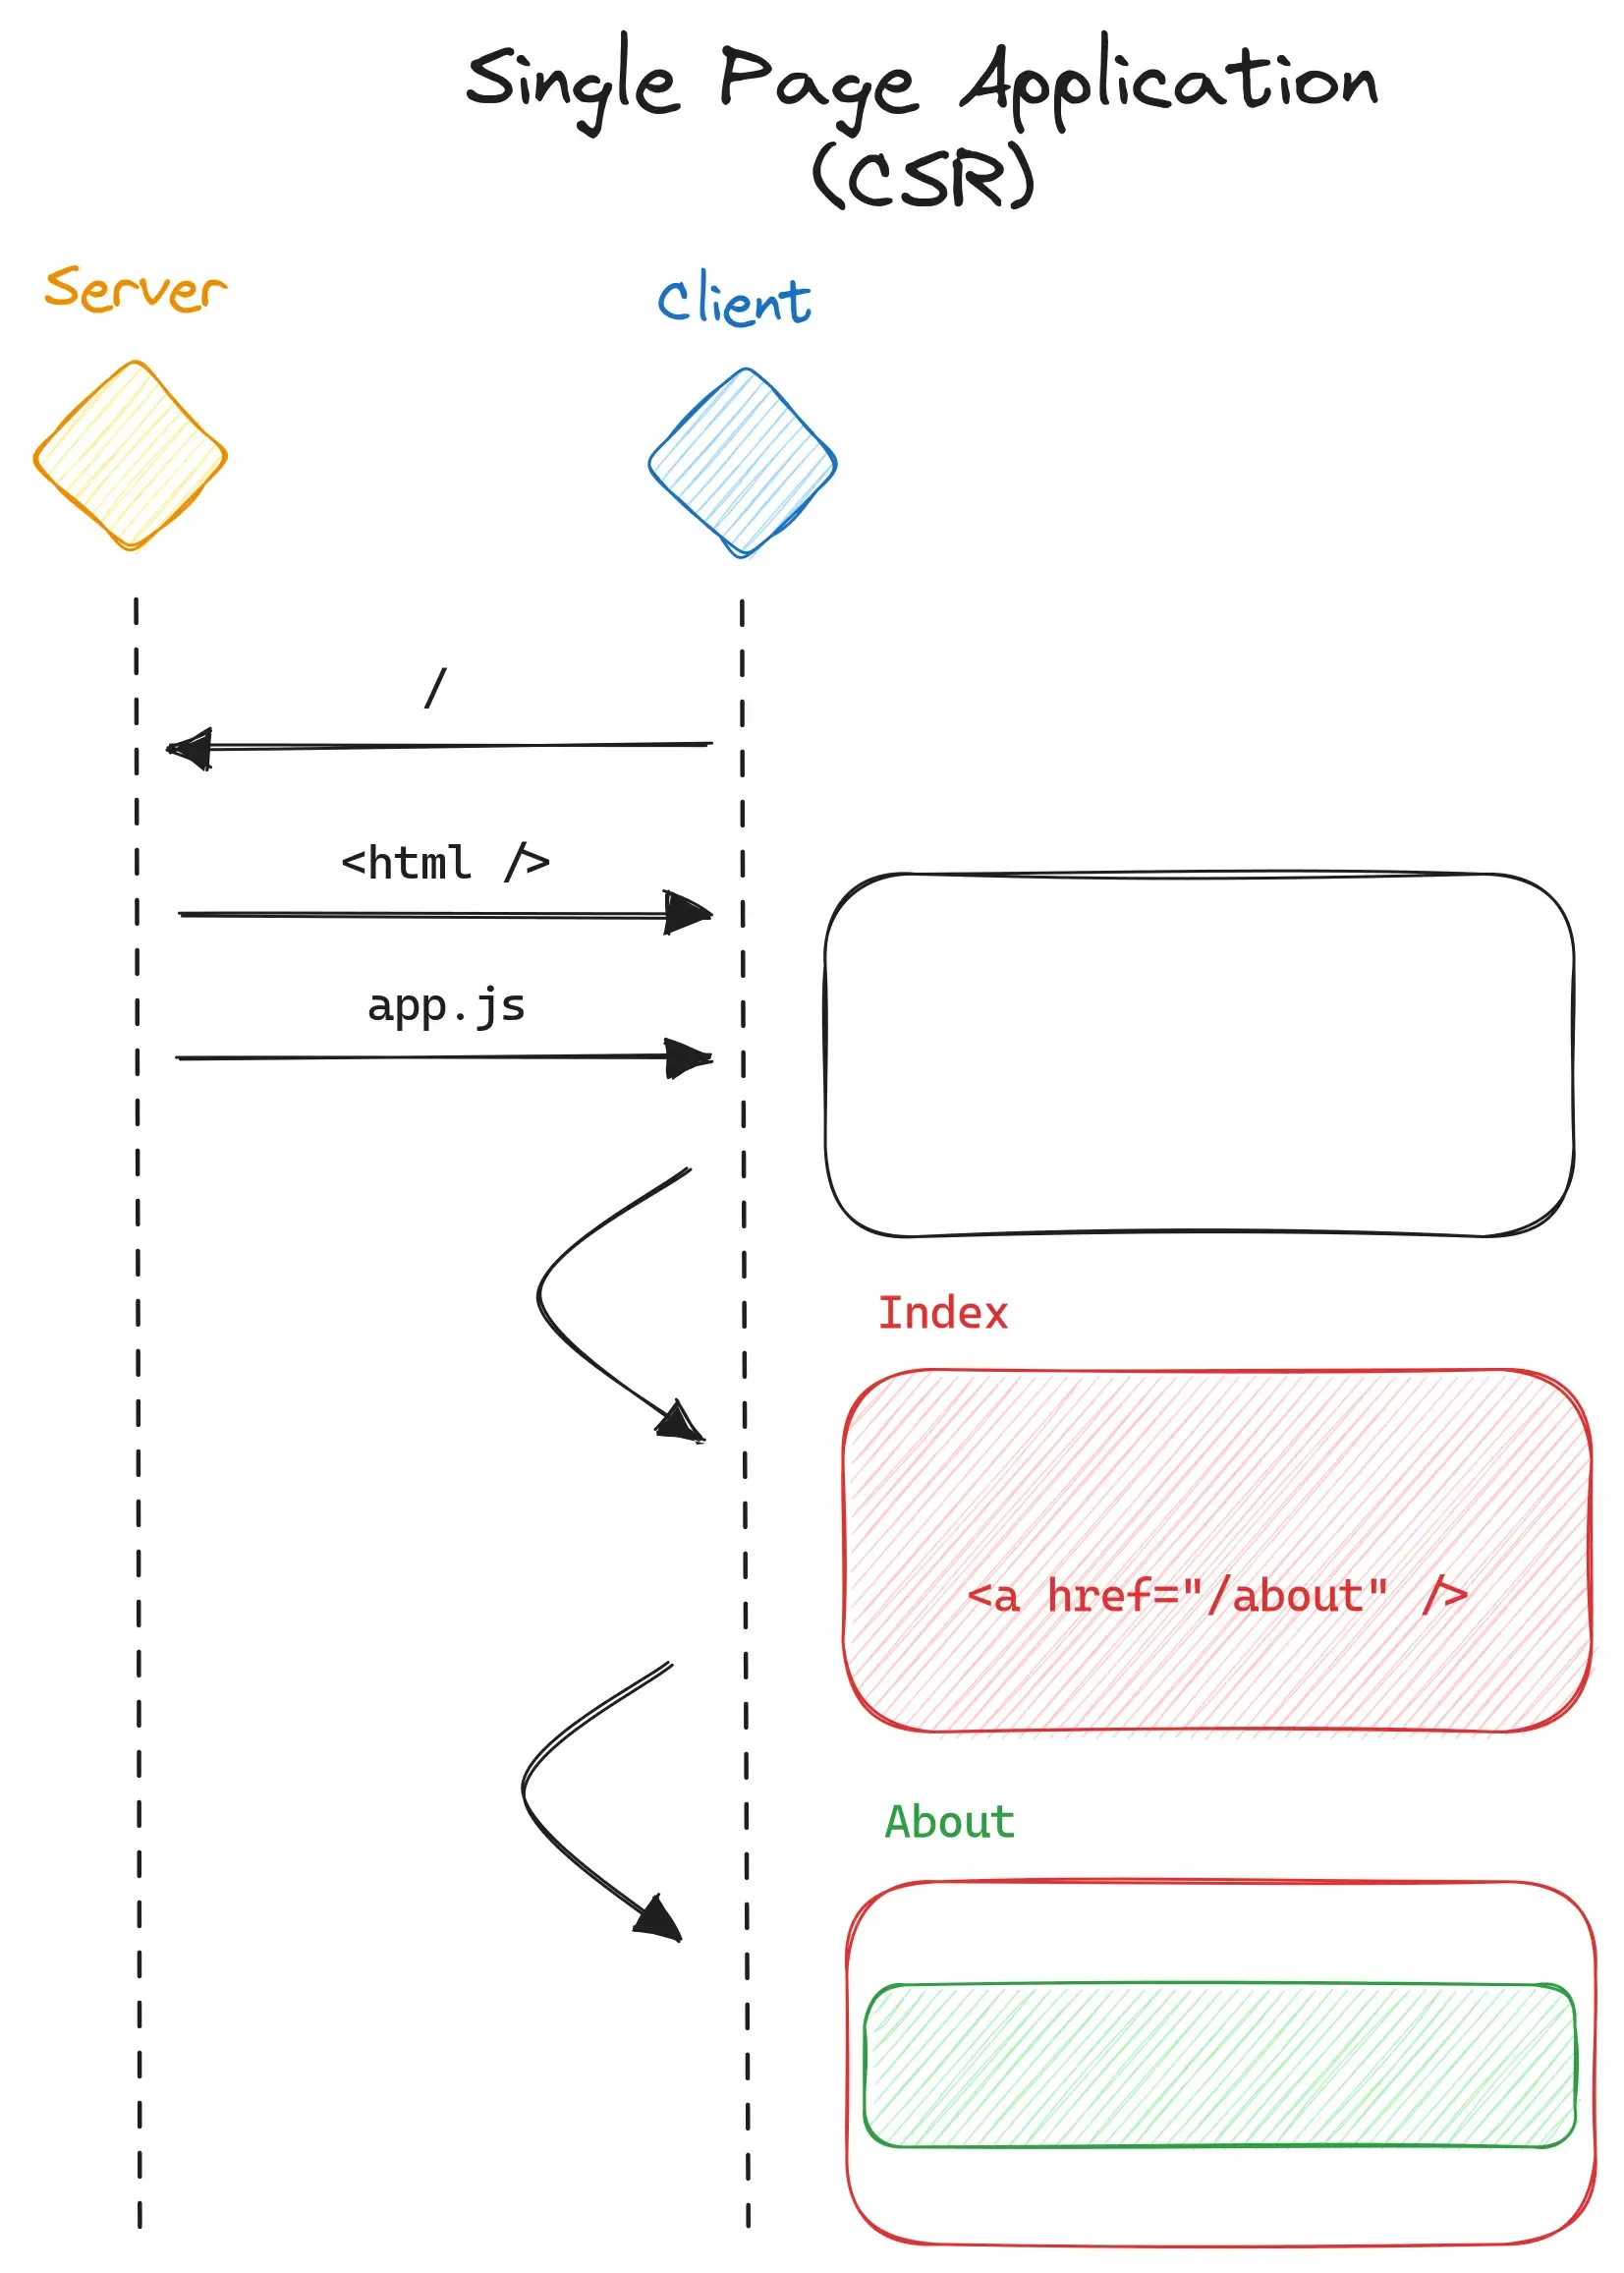 Flowchart of a single-page application